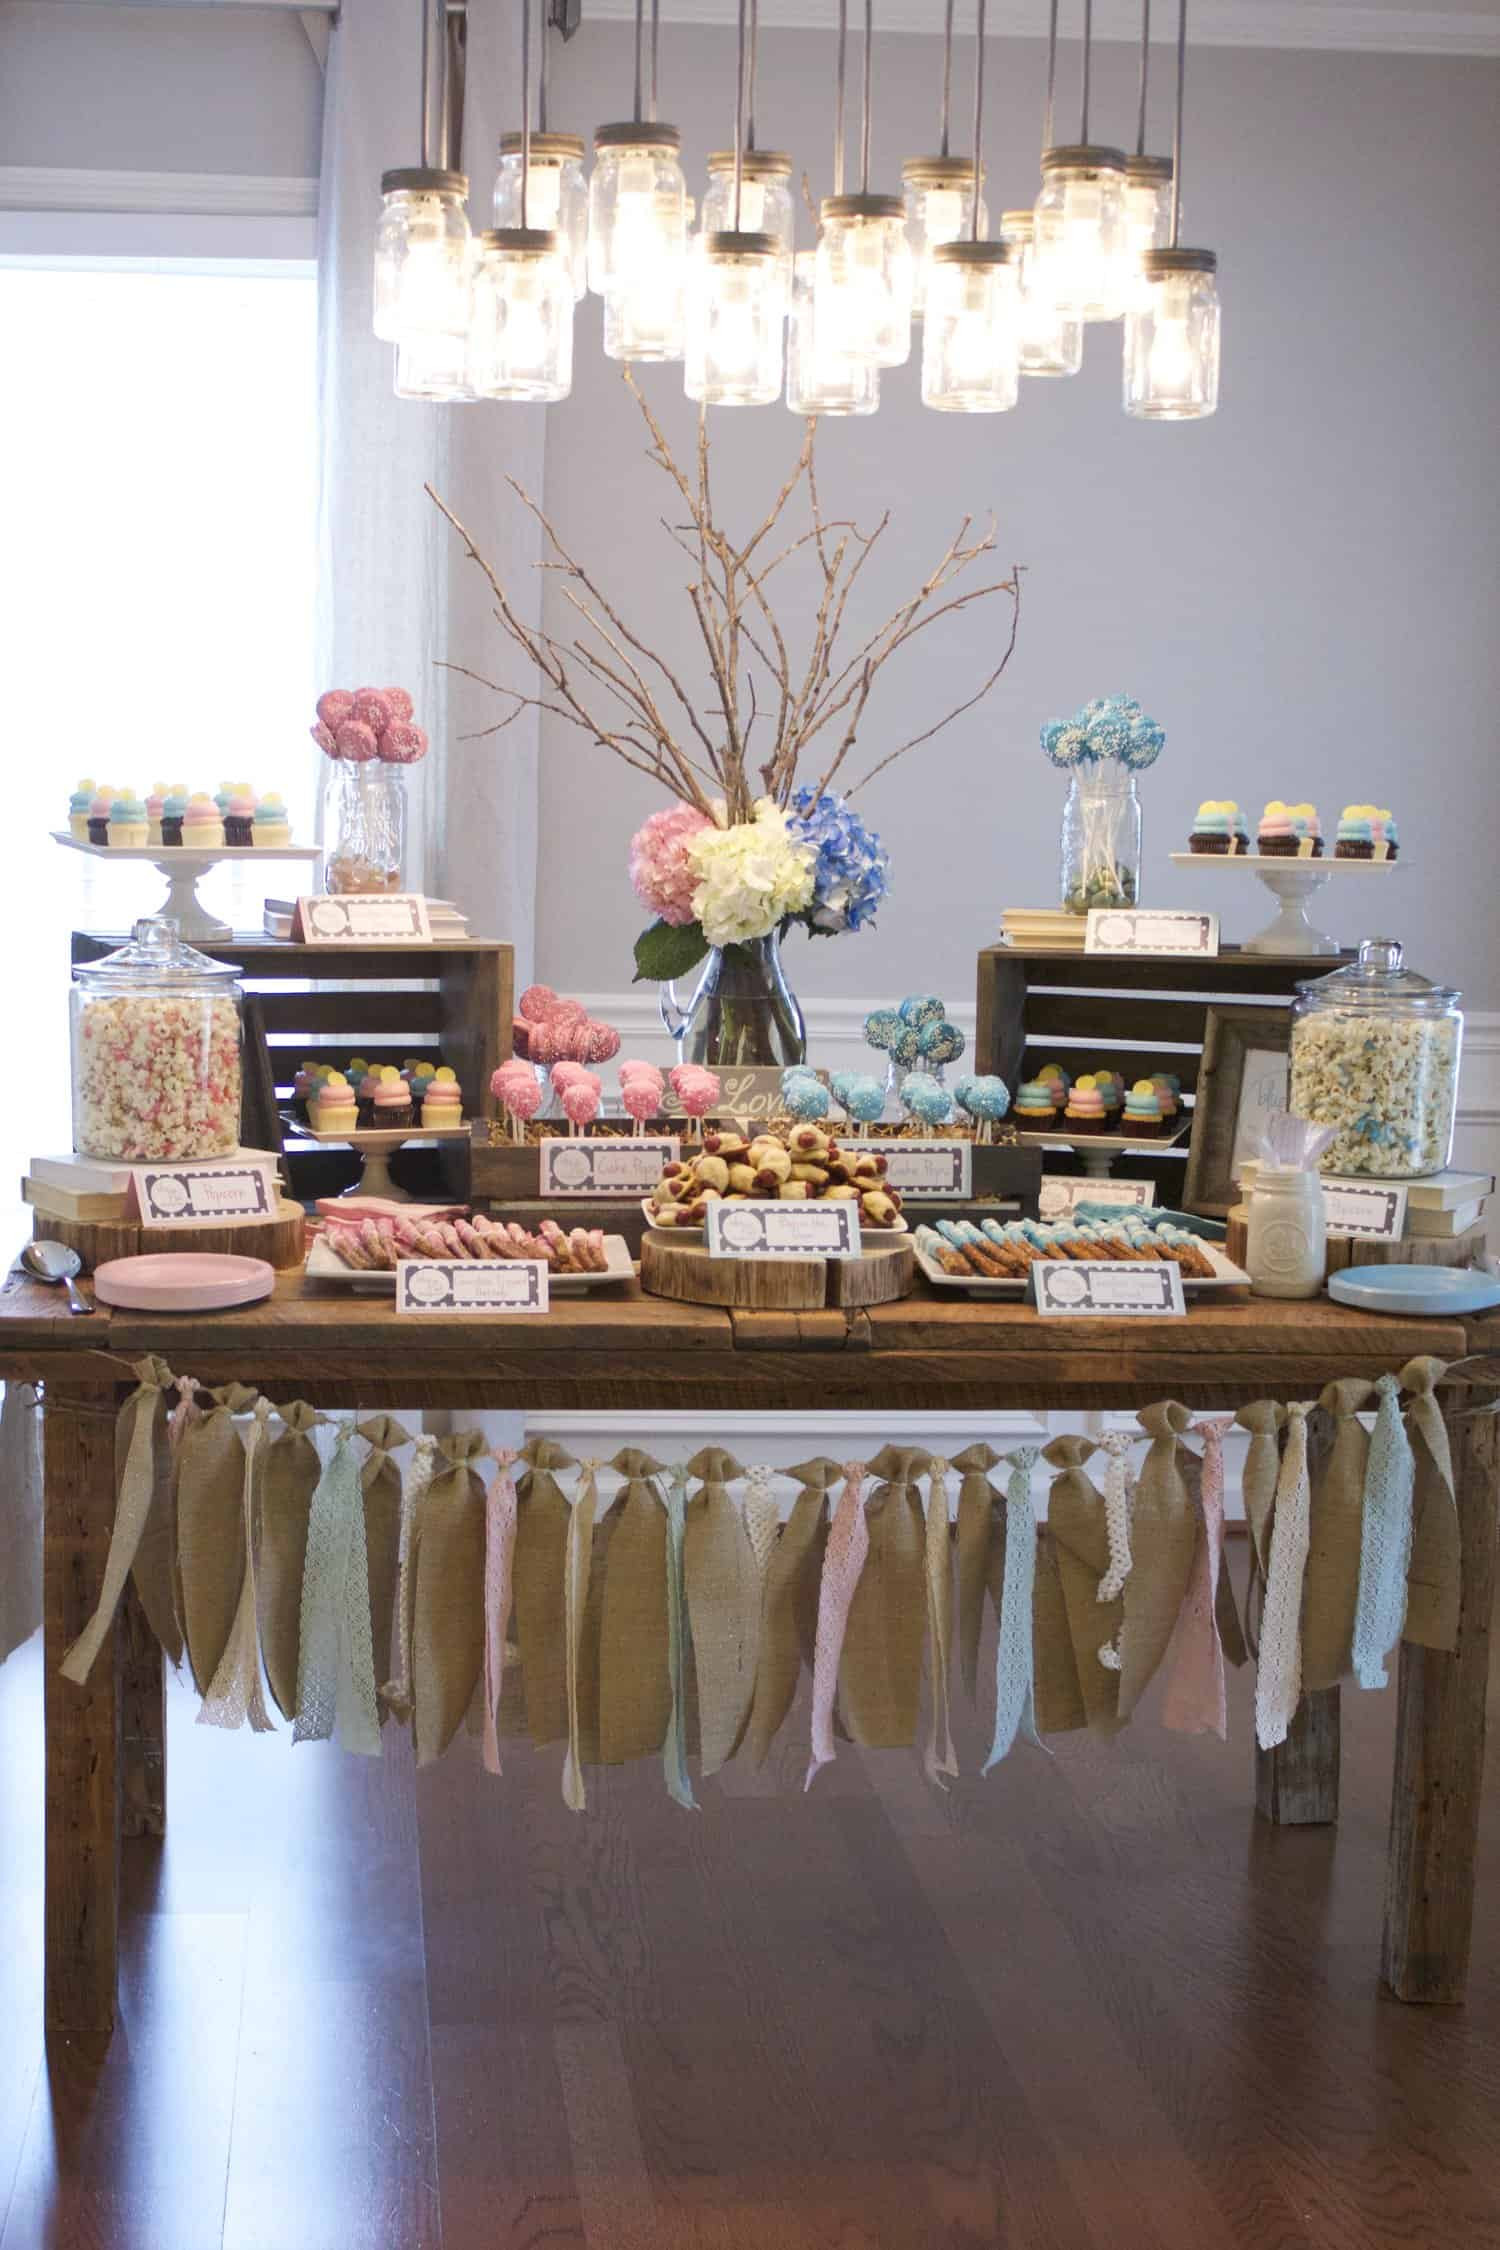 Gender Reveal Party Decoration Ideas
 17 Tips To Throw An Unfor table Gender Reveal Party